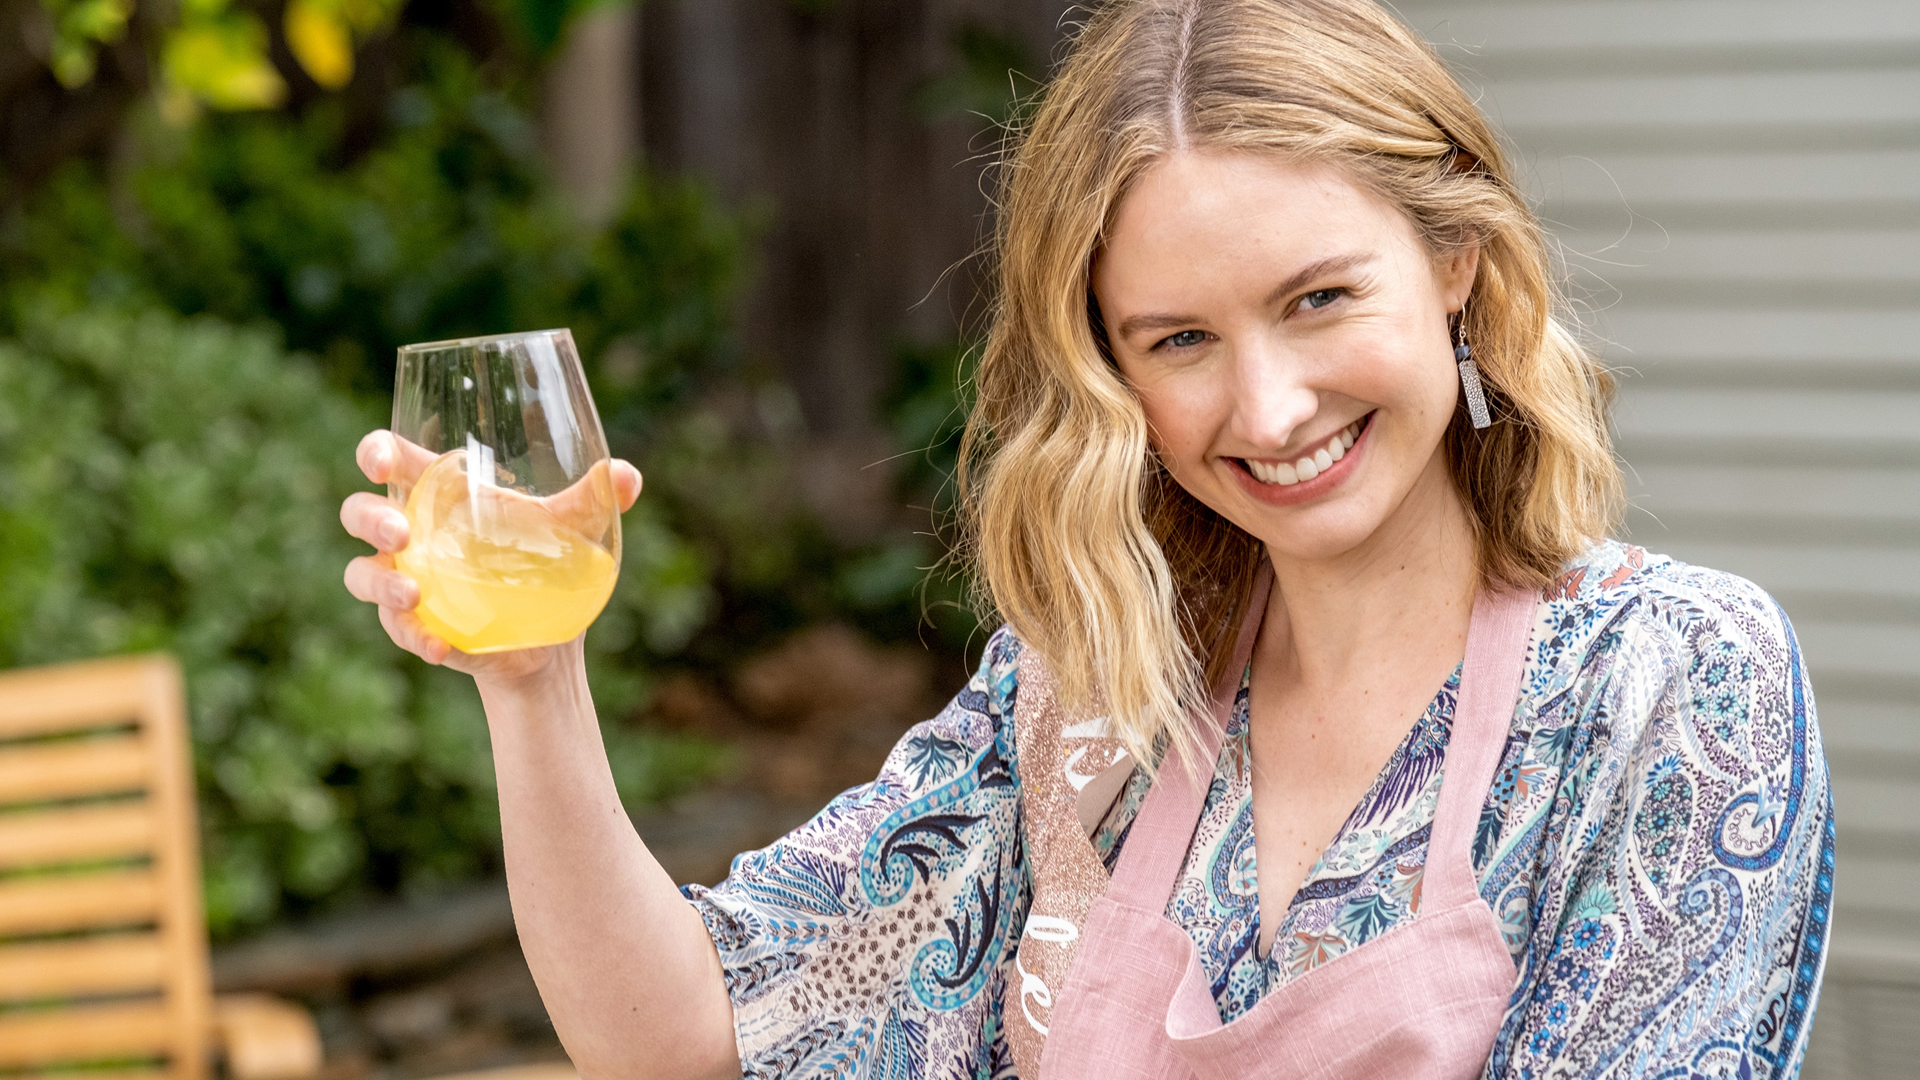 Caitlin Thompson lifts a glass of lemonade as Madison in ‘This Is Us’ Season 5 Episode 15, ‘Jerry 2.0’